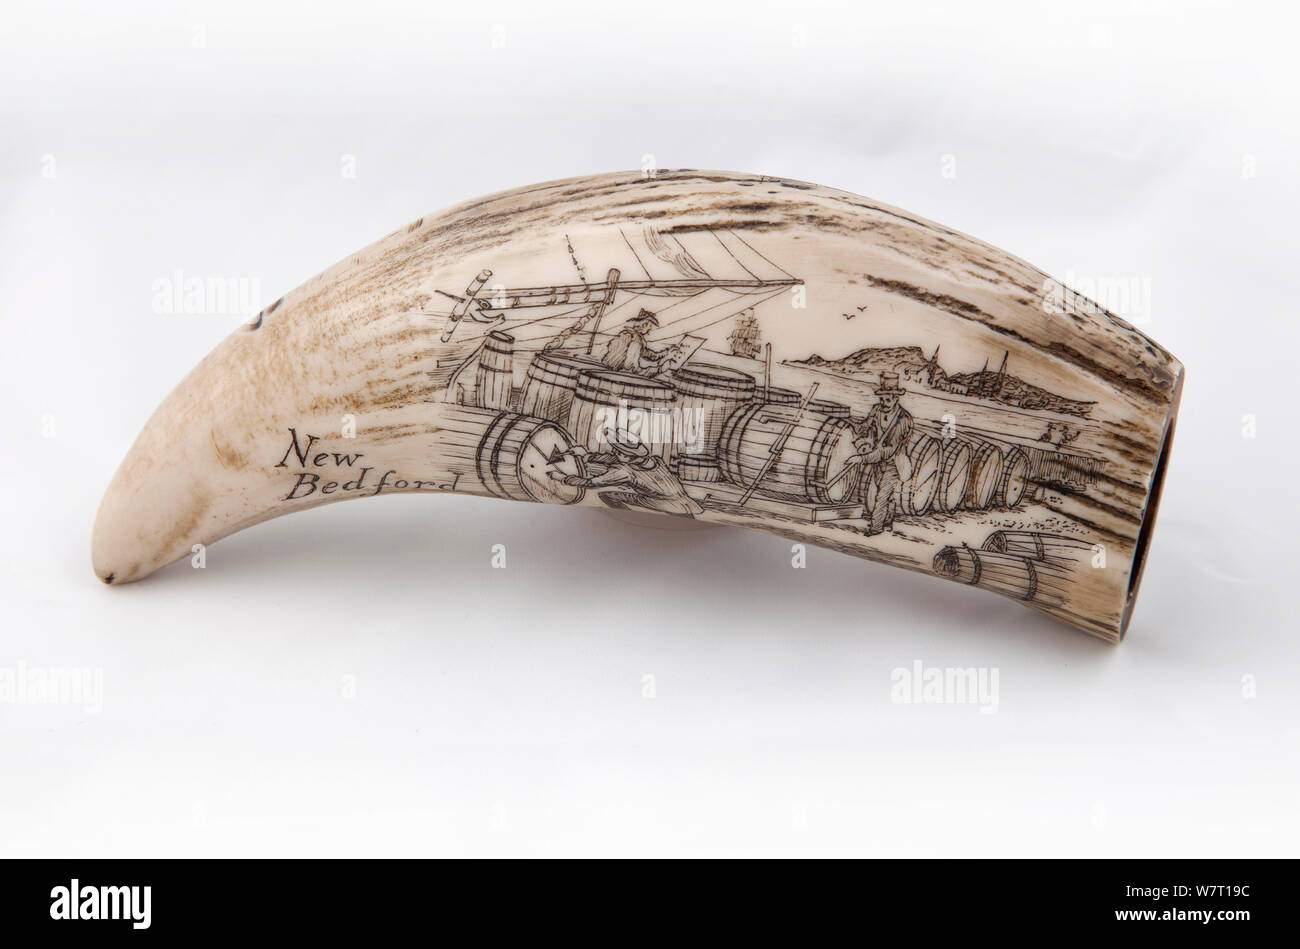 Whale tooth scrimshaw with pictorial etching of men inspecting barrels before voyage (probably a replica). Stock Photo